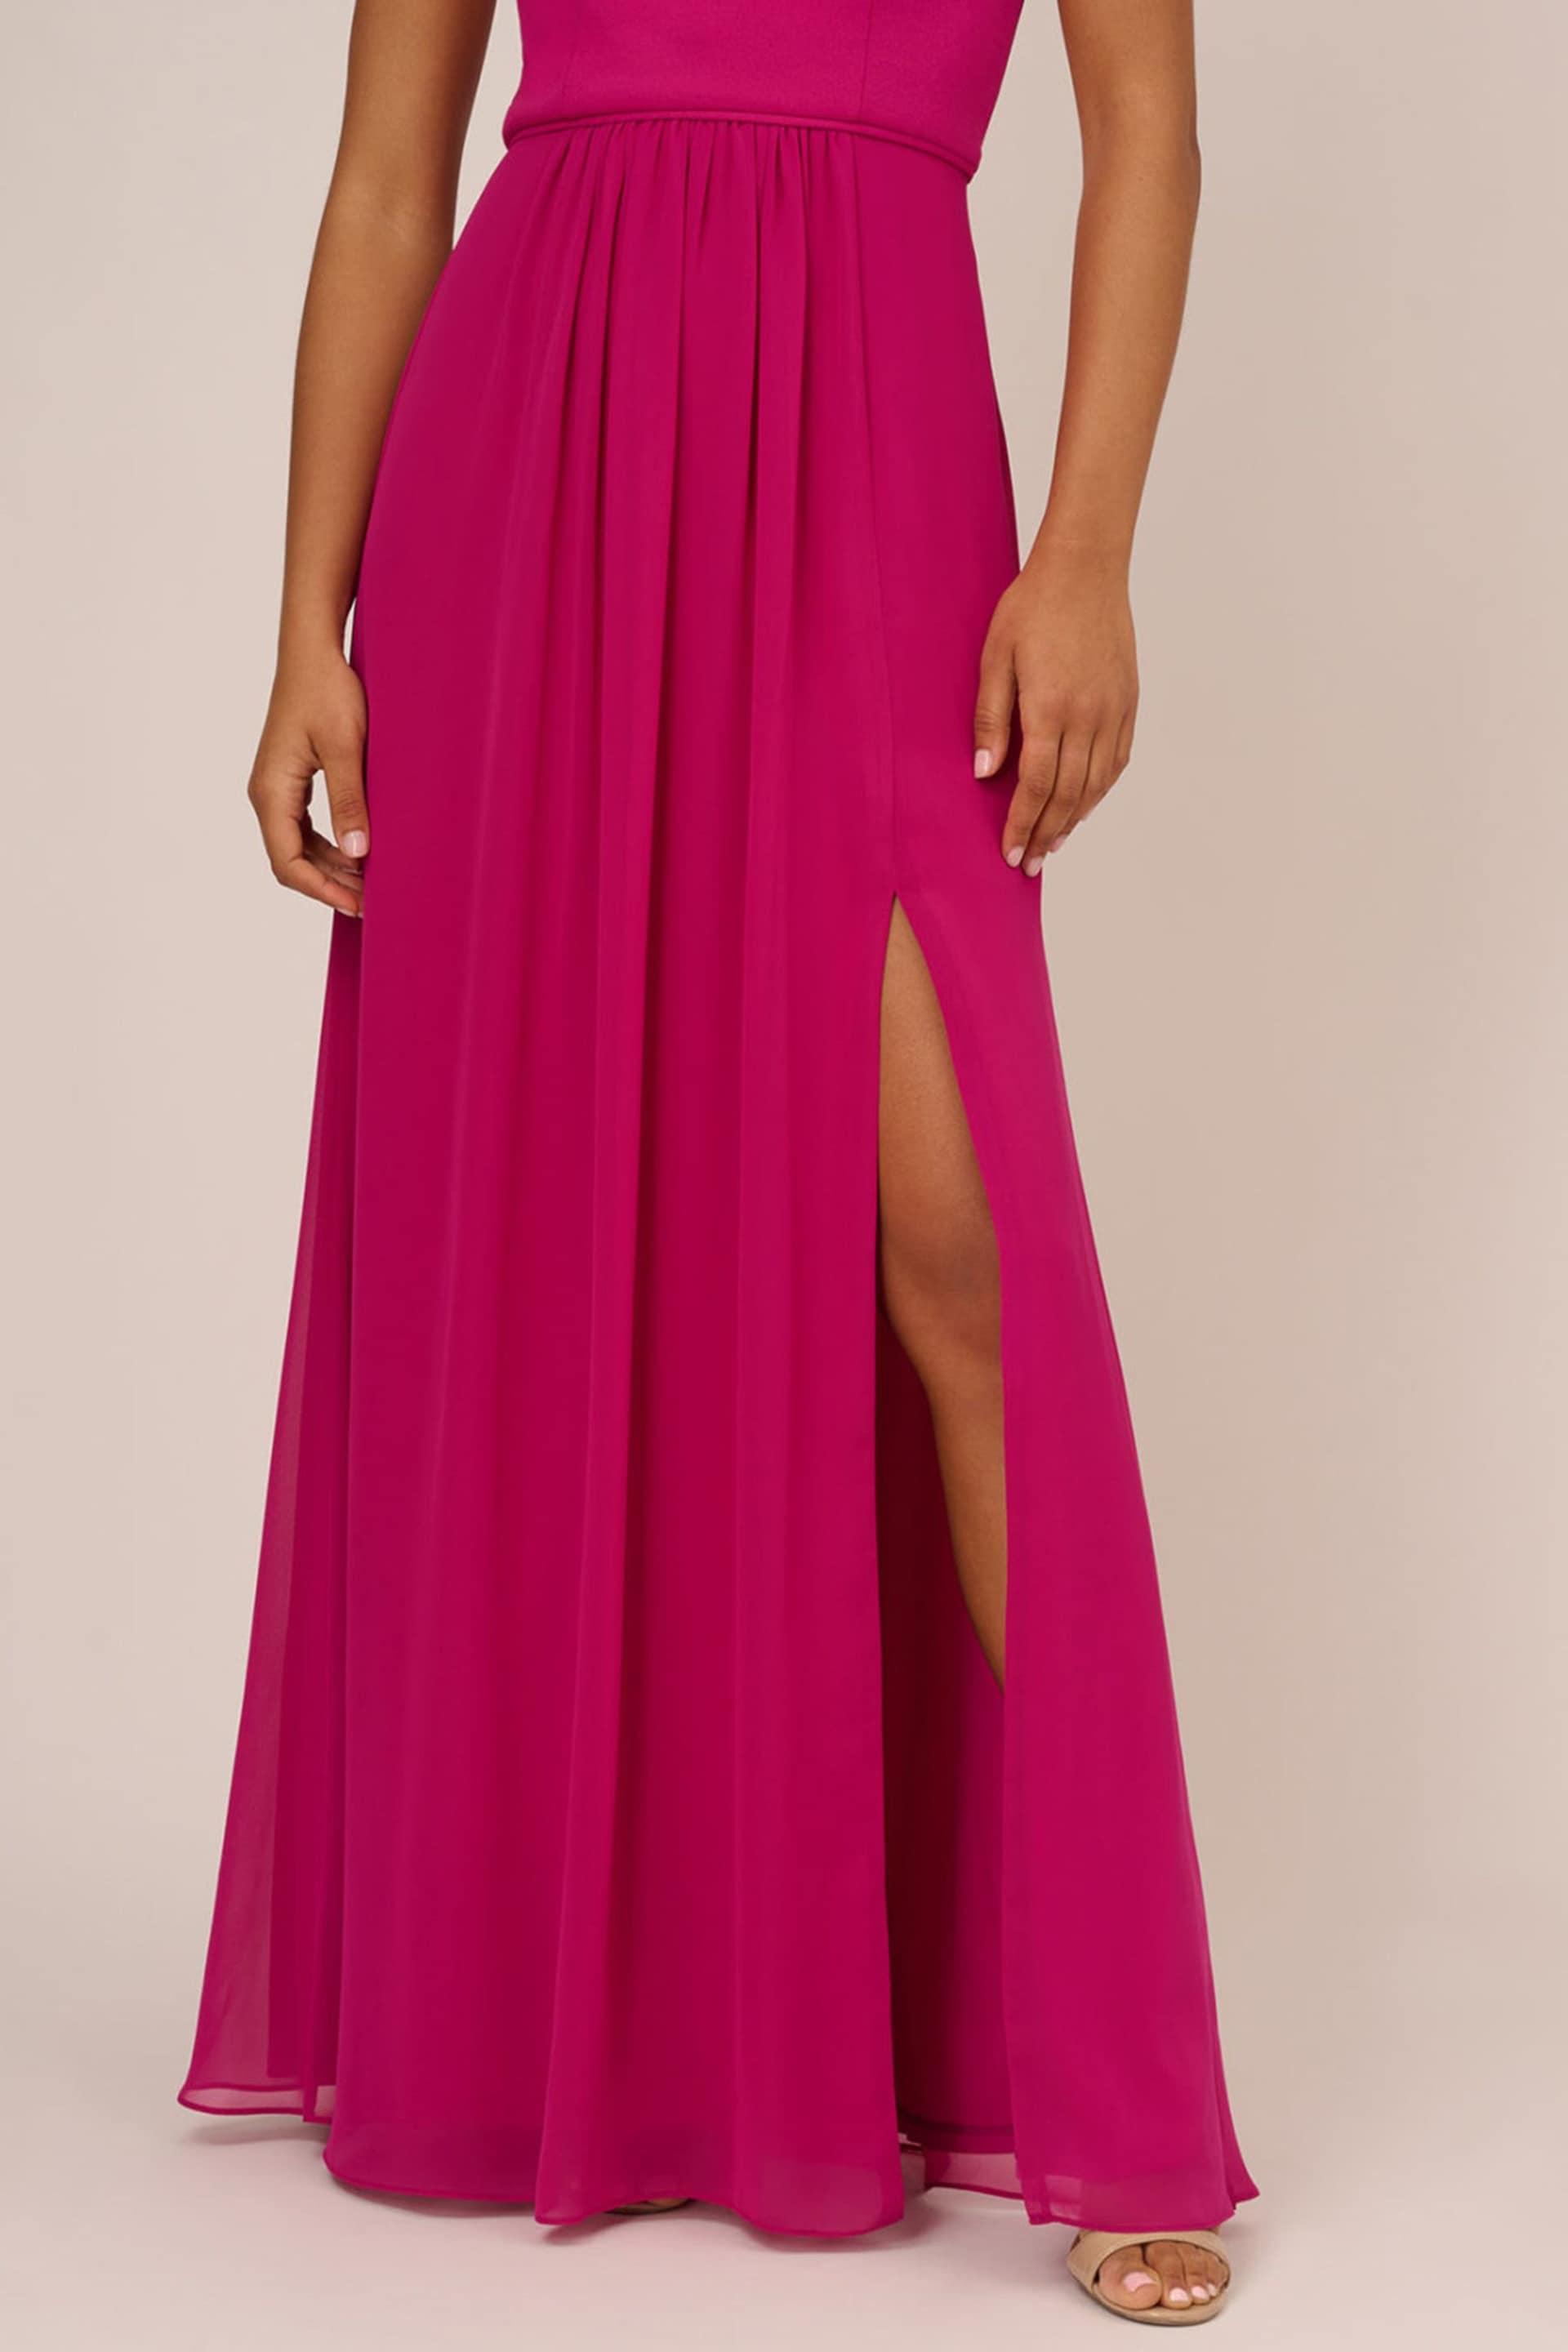 Adrianna Papell One Shoulder Chiffon Gown - Image 4 of 7